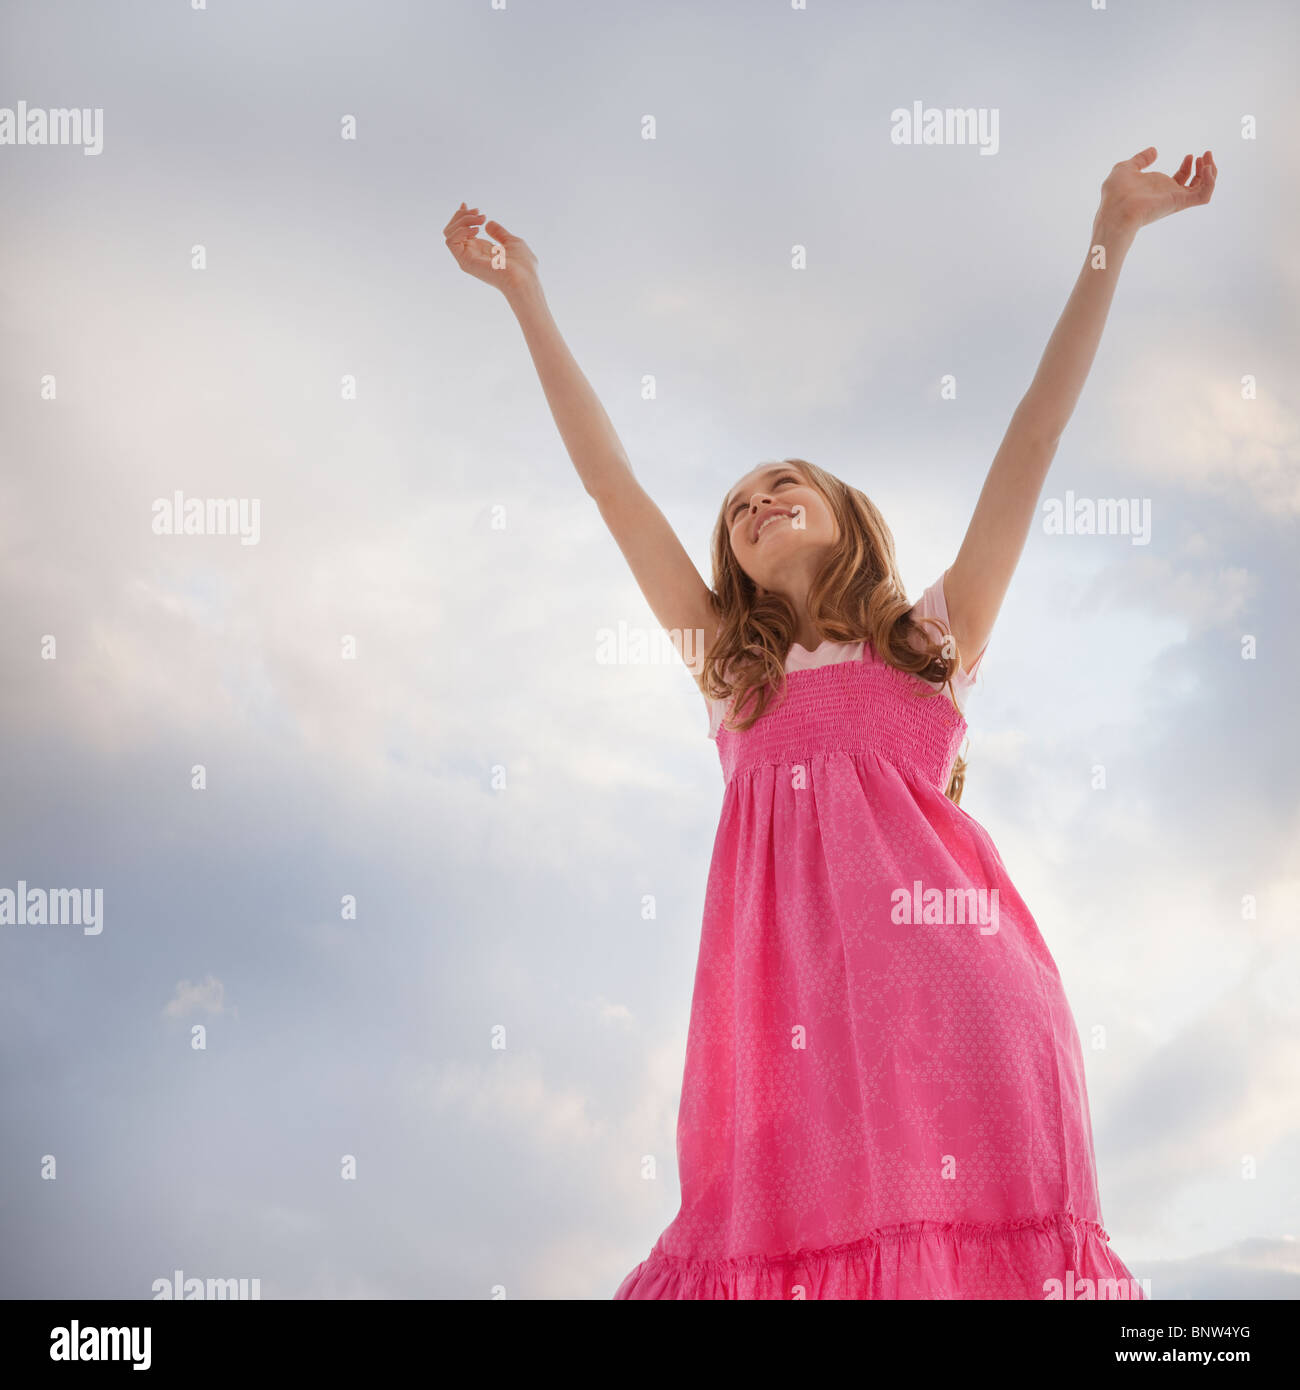 Teenage girl raising her arms in the air Stock Photo